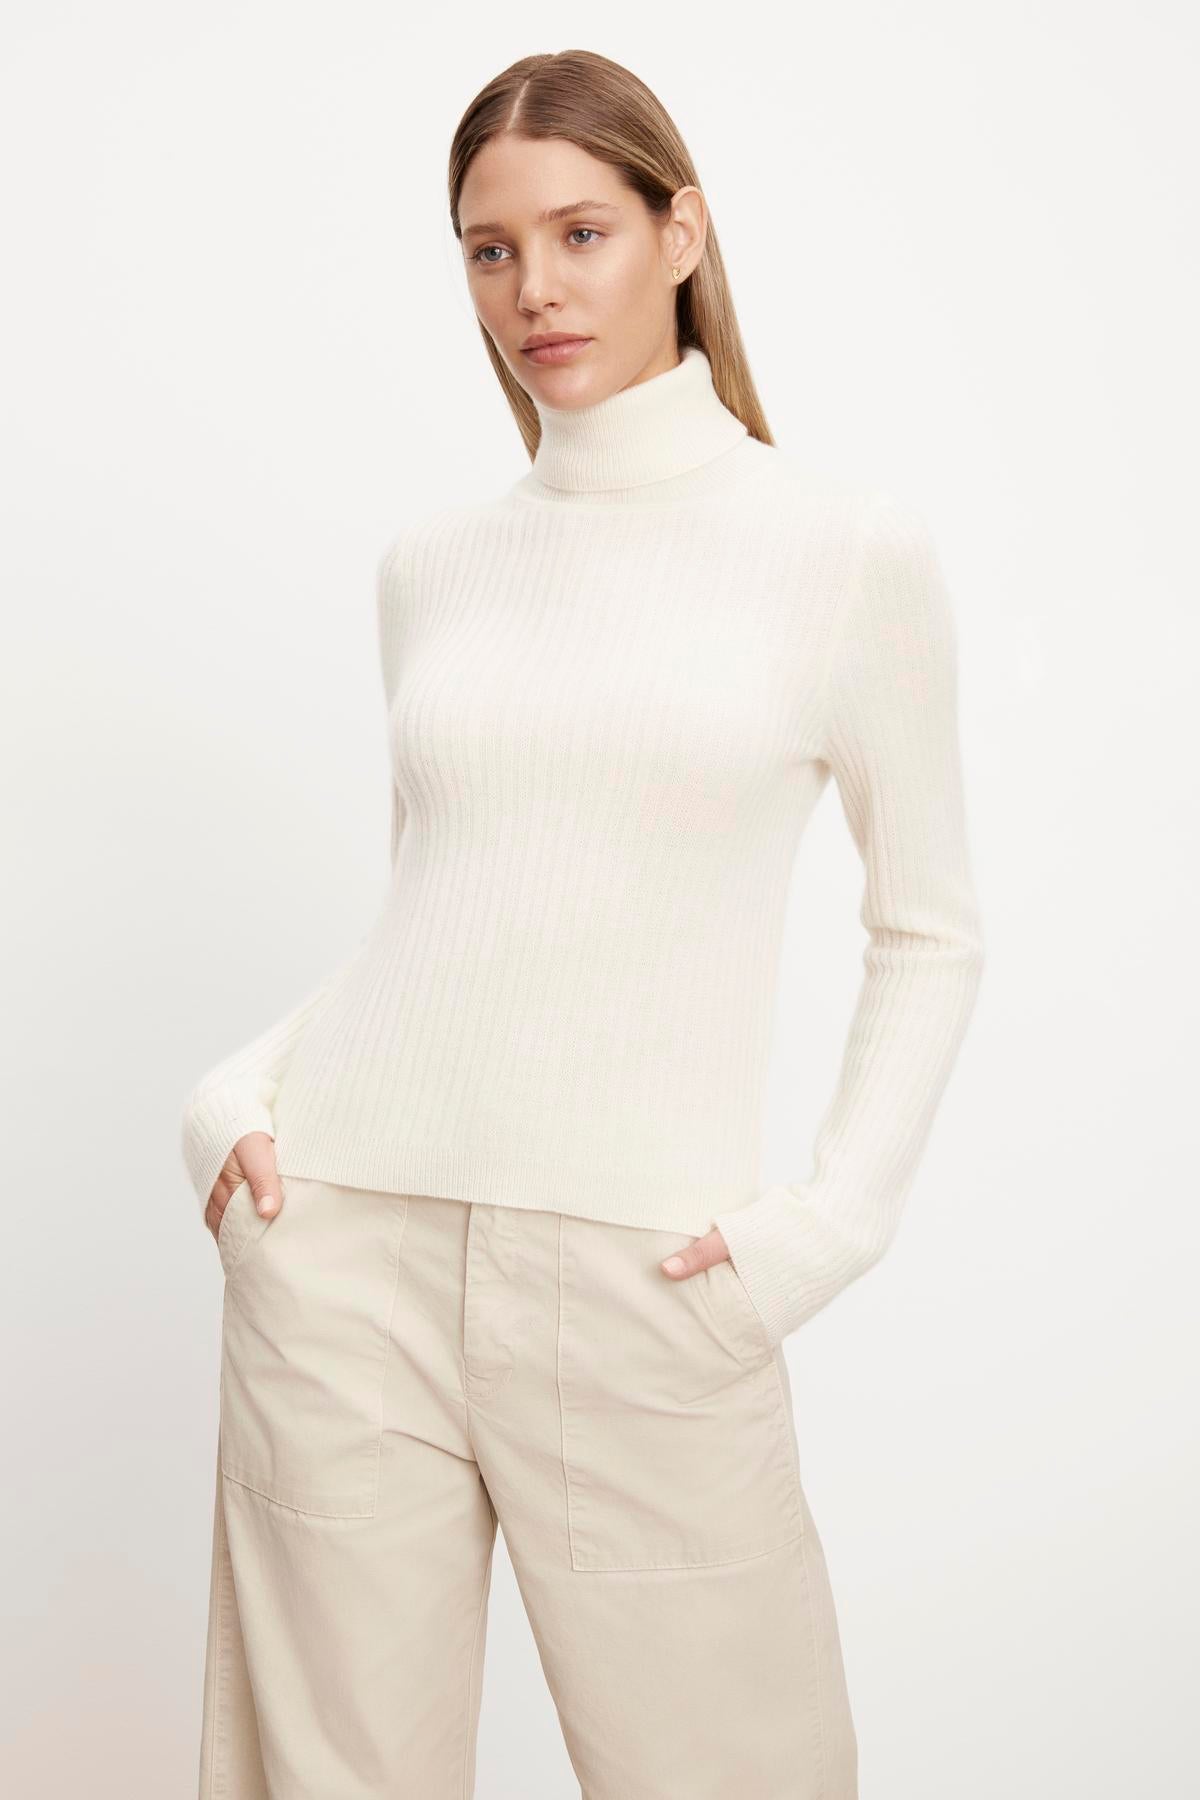 The model is wearing a LORI CASHMERE TURTLENECK SWEATER by Velvet by Graham & Spencer and beige trousers.-35727549104321